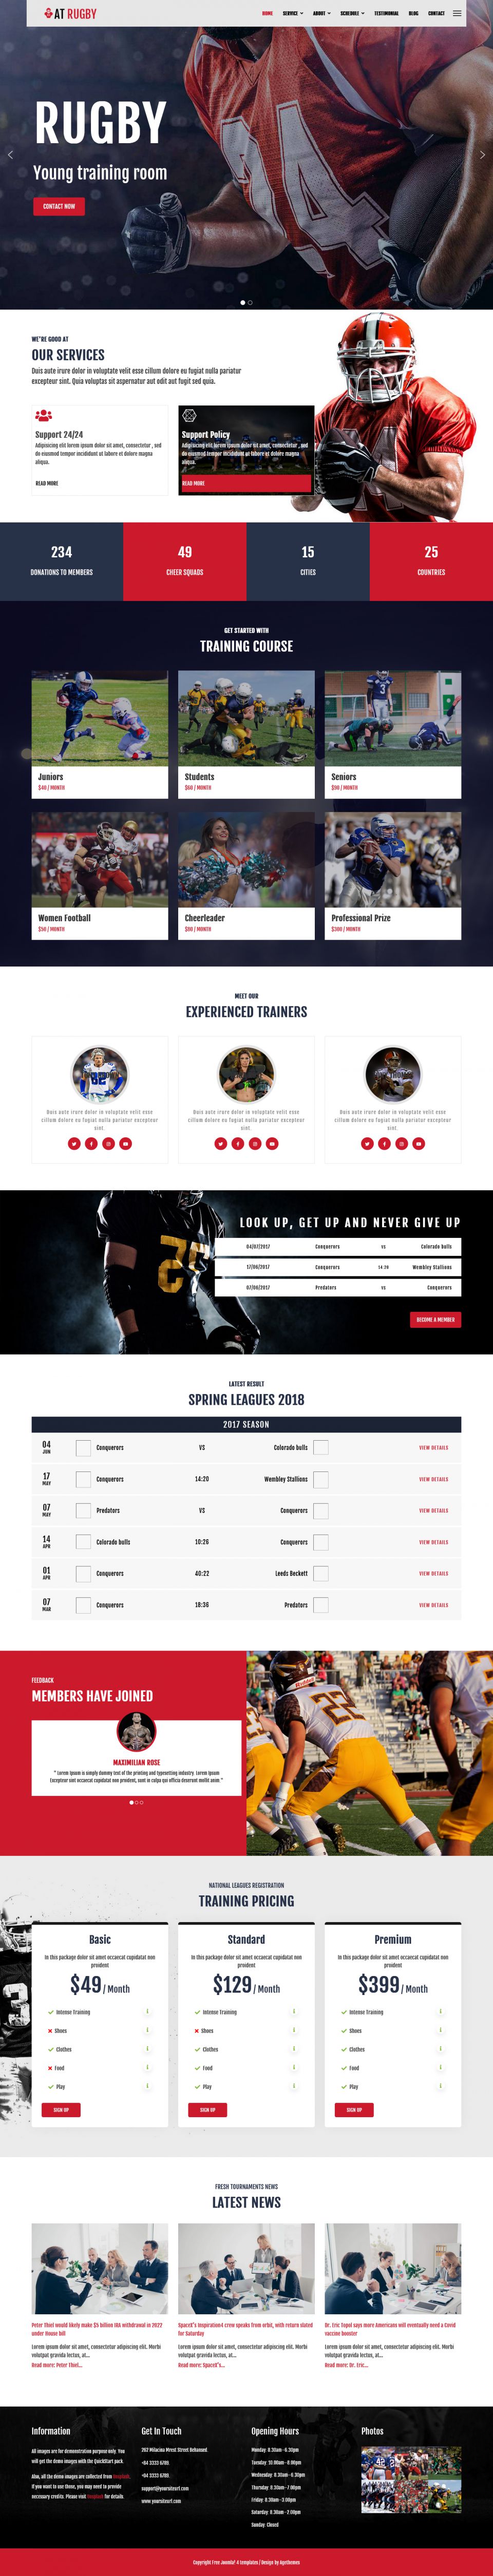 Joomla template AGE Themes Rugby Onepage